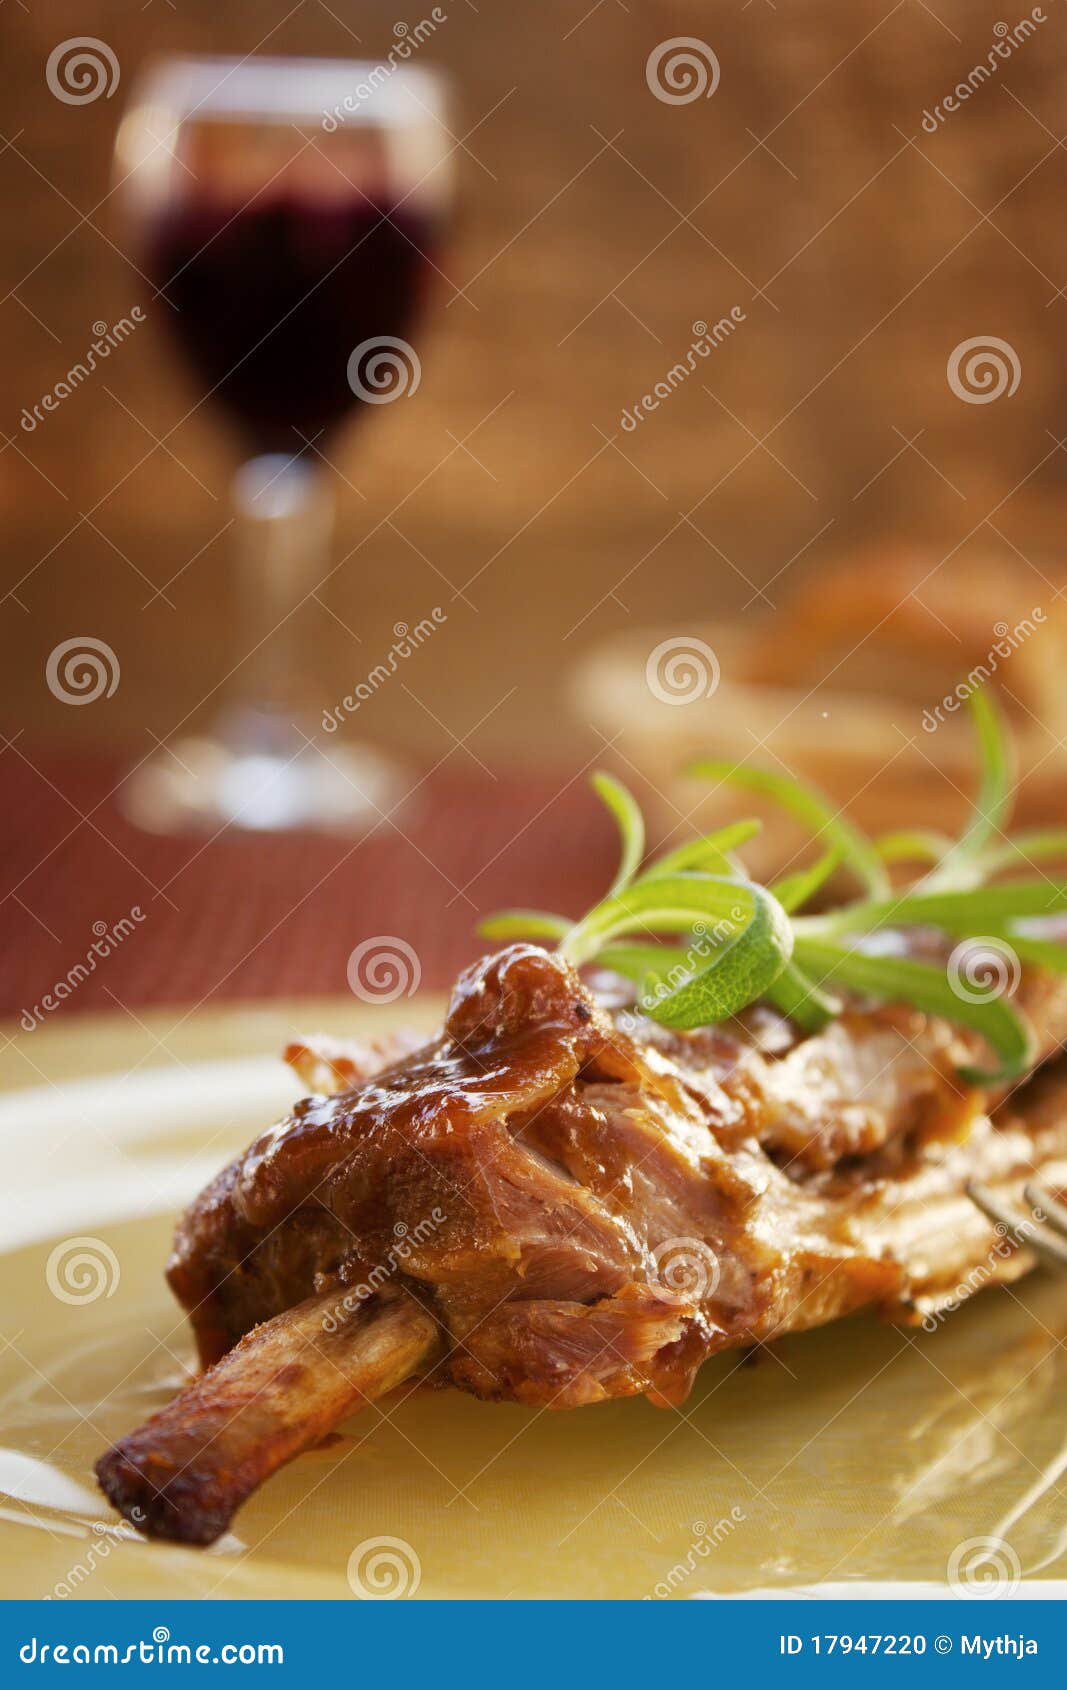 veal ribs with sauce